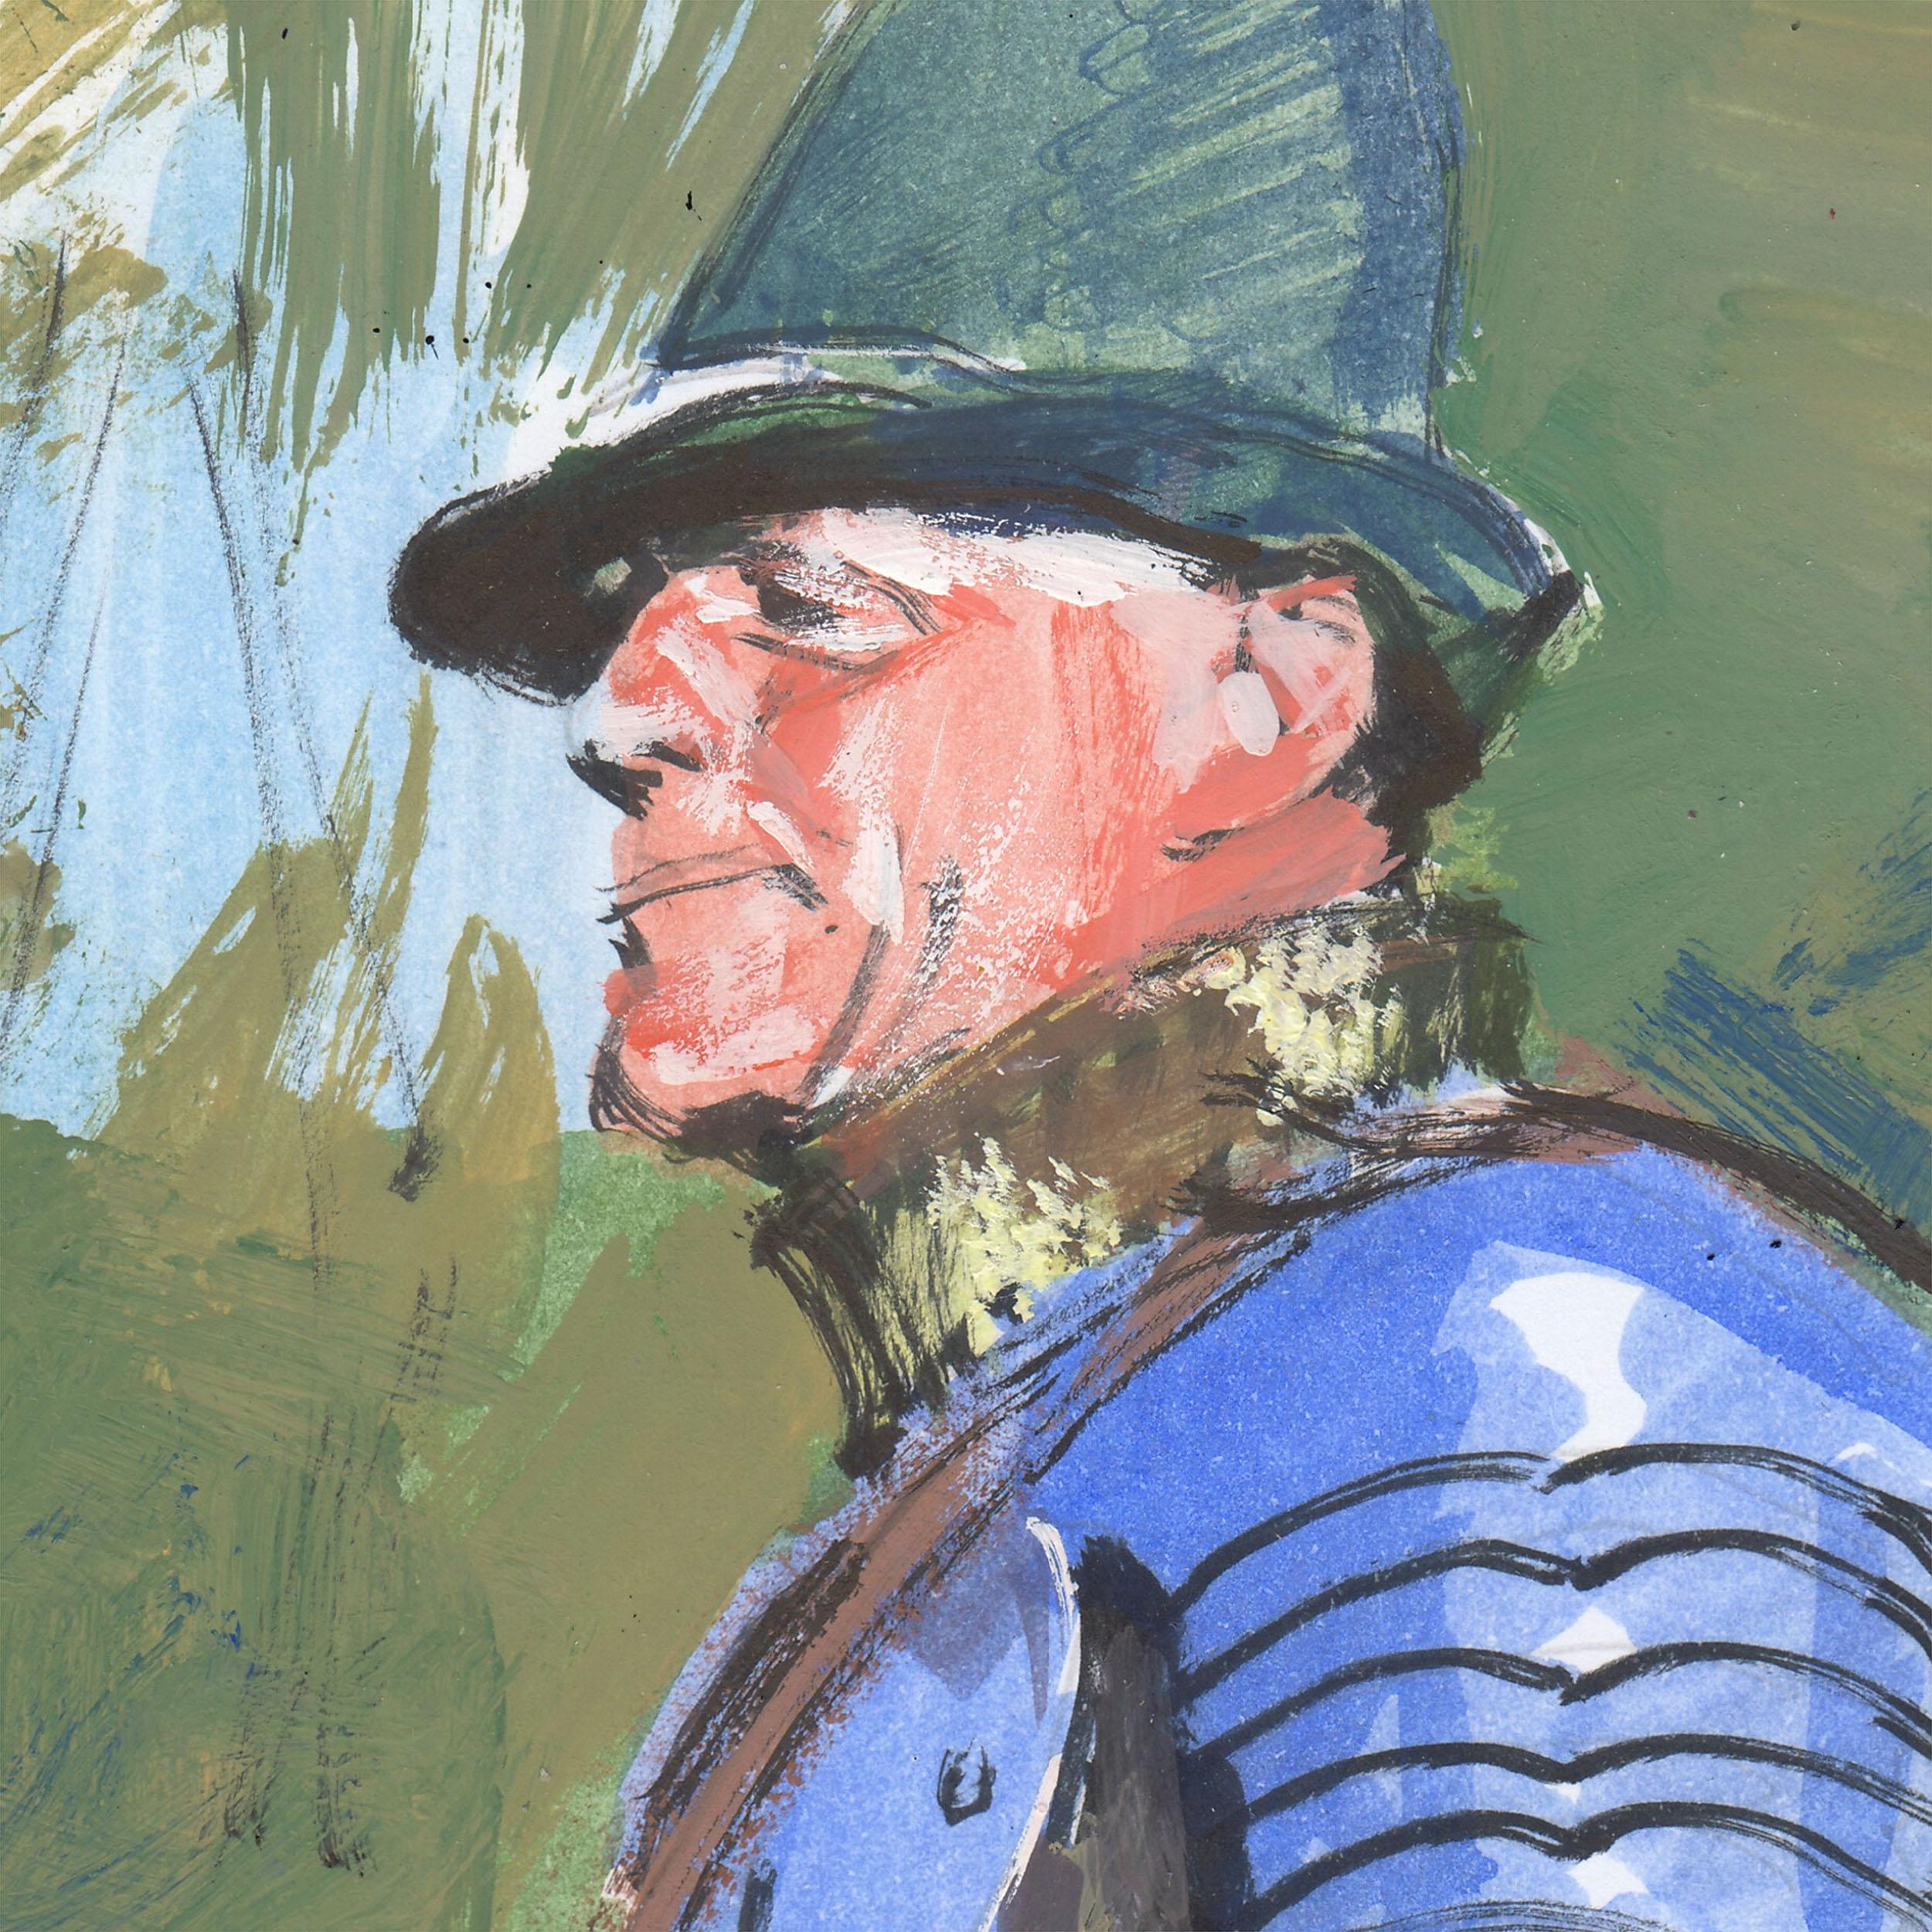 Sir Dominic Sewell at the St. George's Jousting Tournament in Moscow in 2019 - Realist Art by Evgeniy Monahov